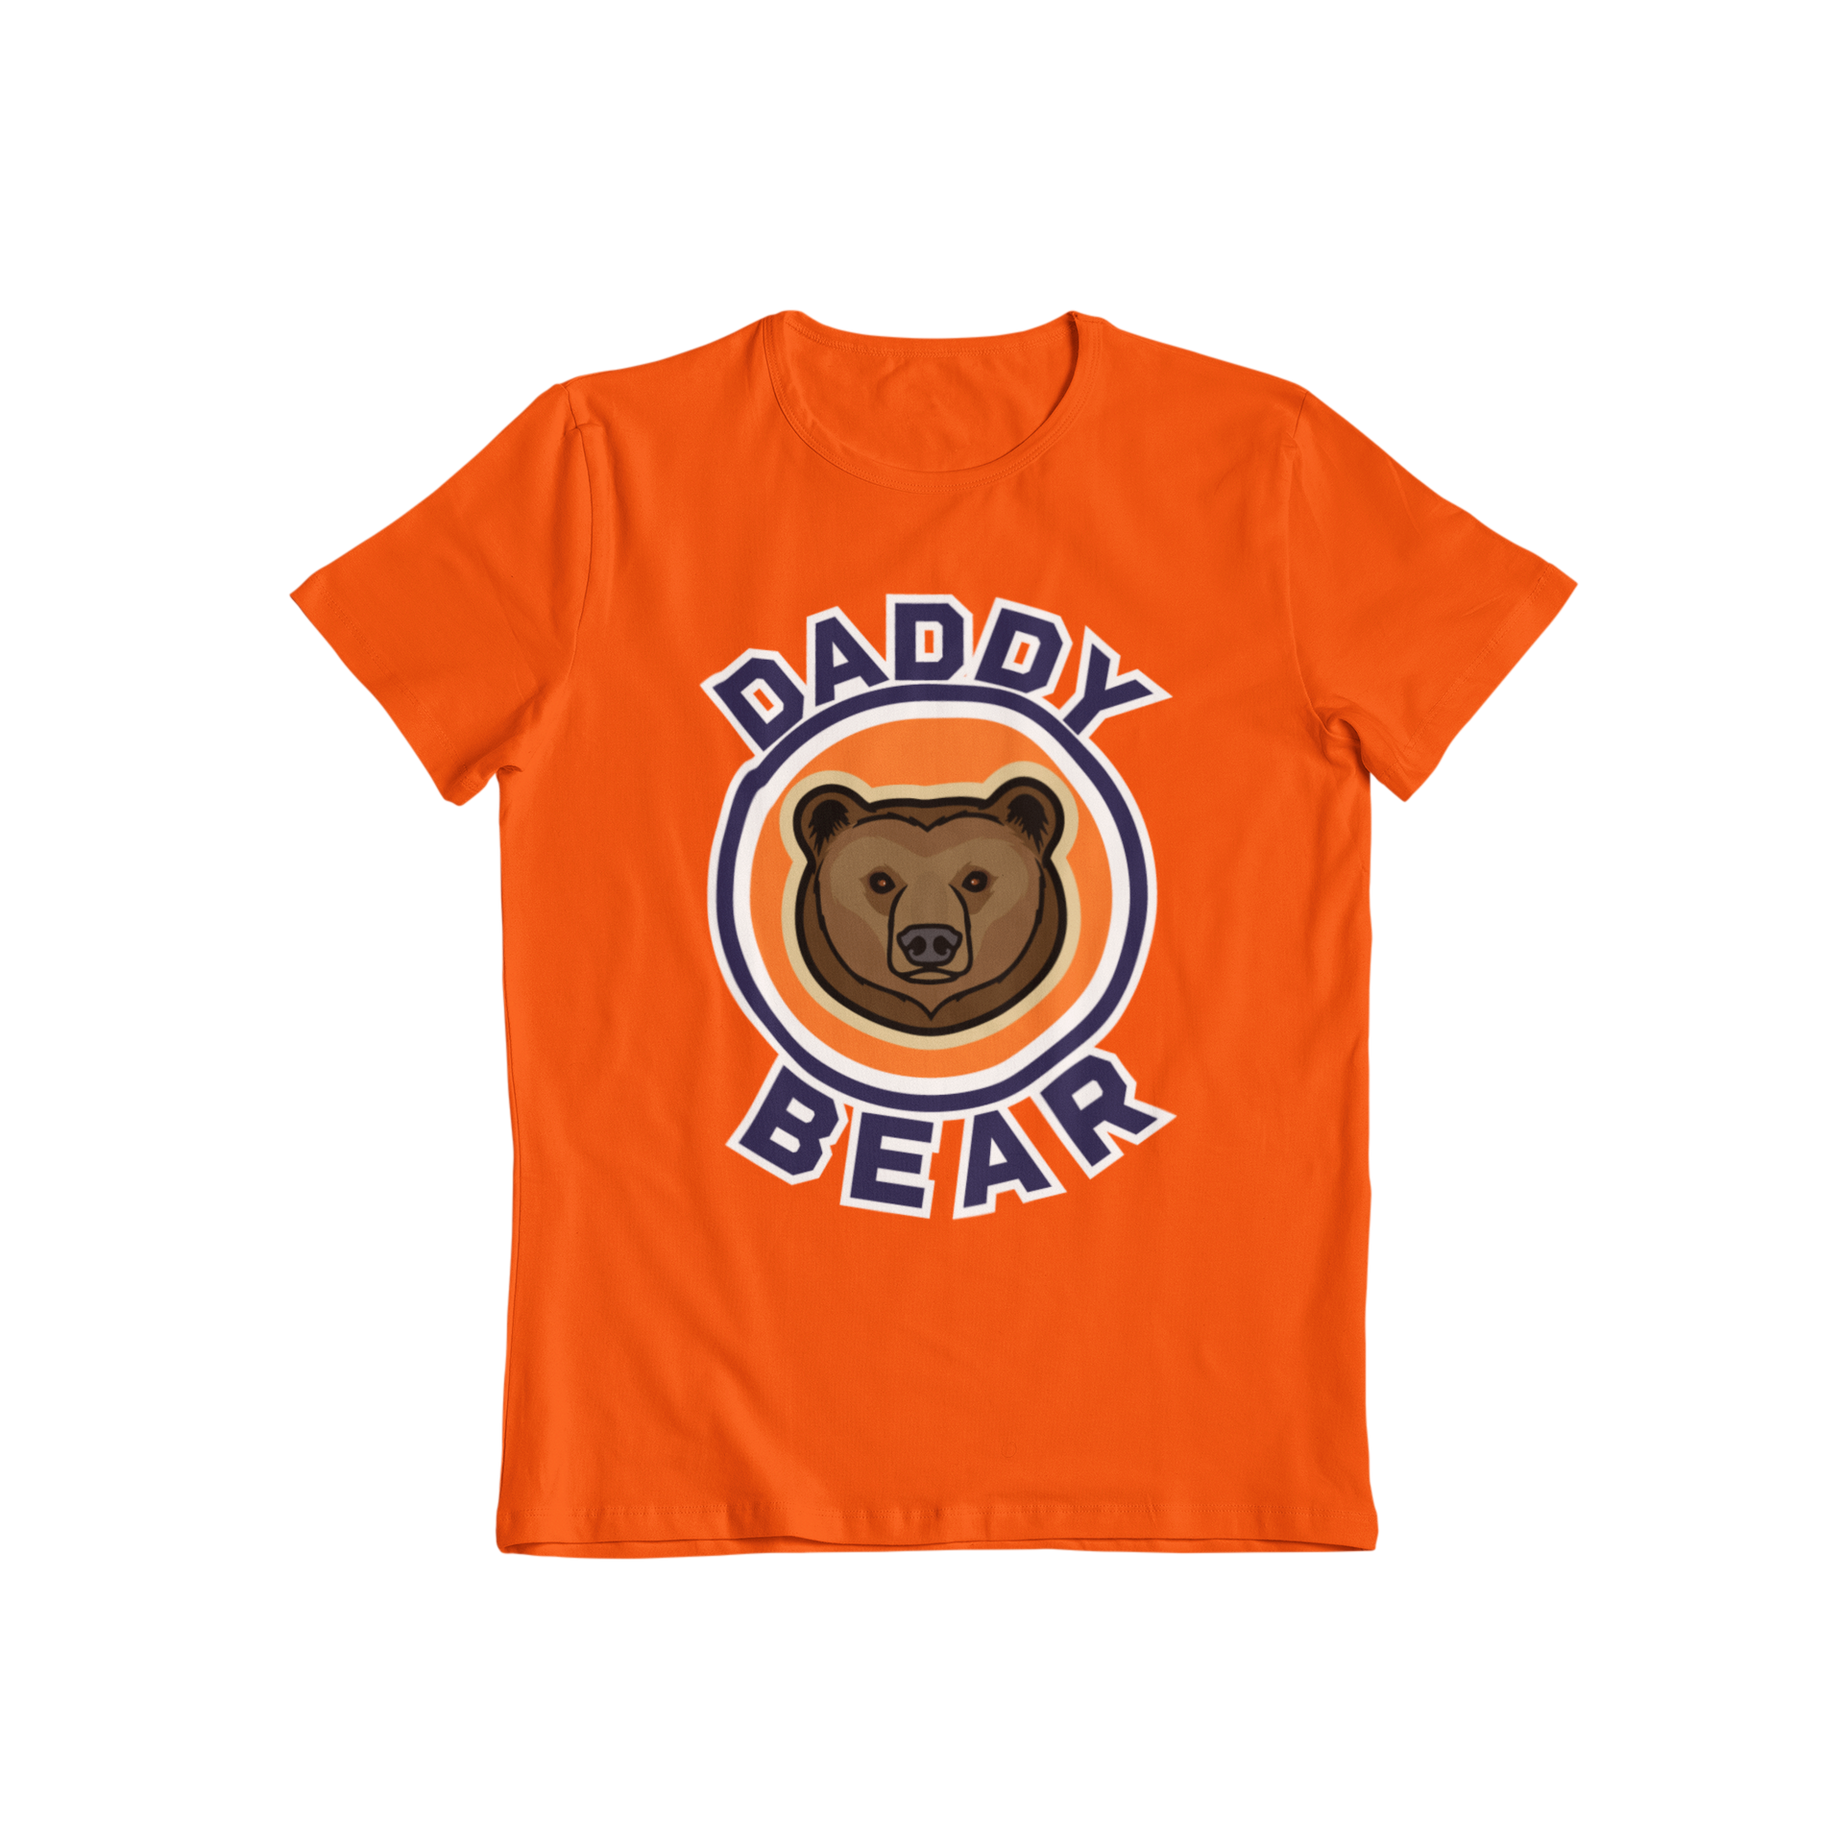 Looking for a cool Father's Day gift? Teevolution has got you covered! Our Daddy Bear t-shirt is the perfect gift for any dad. With a unique bear face design, this tee will make your dad stand out from the crowd. Shop now and give your dad a gift he'll love!